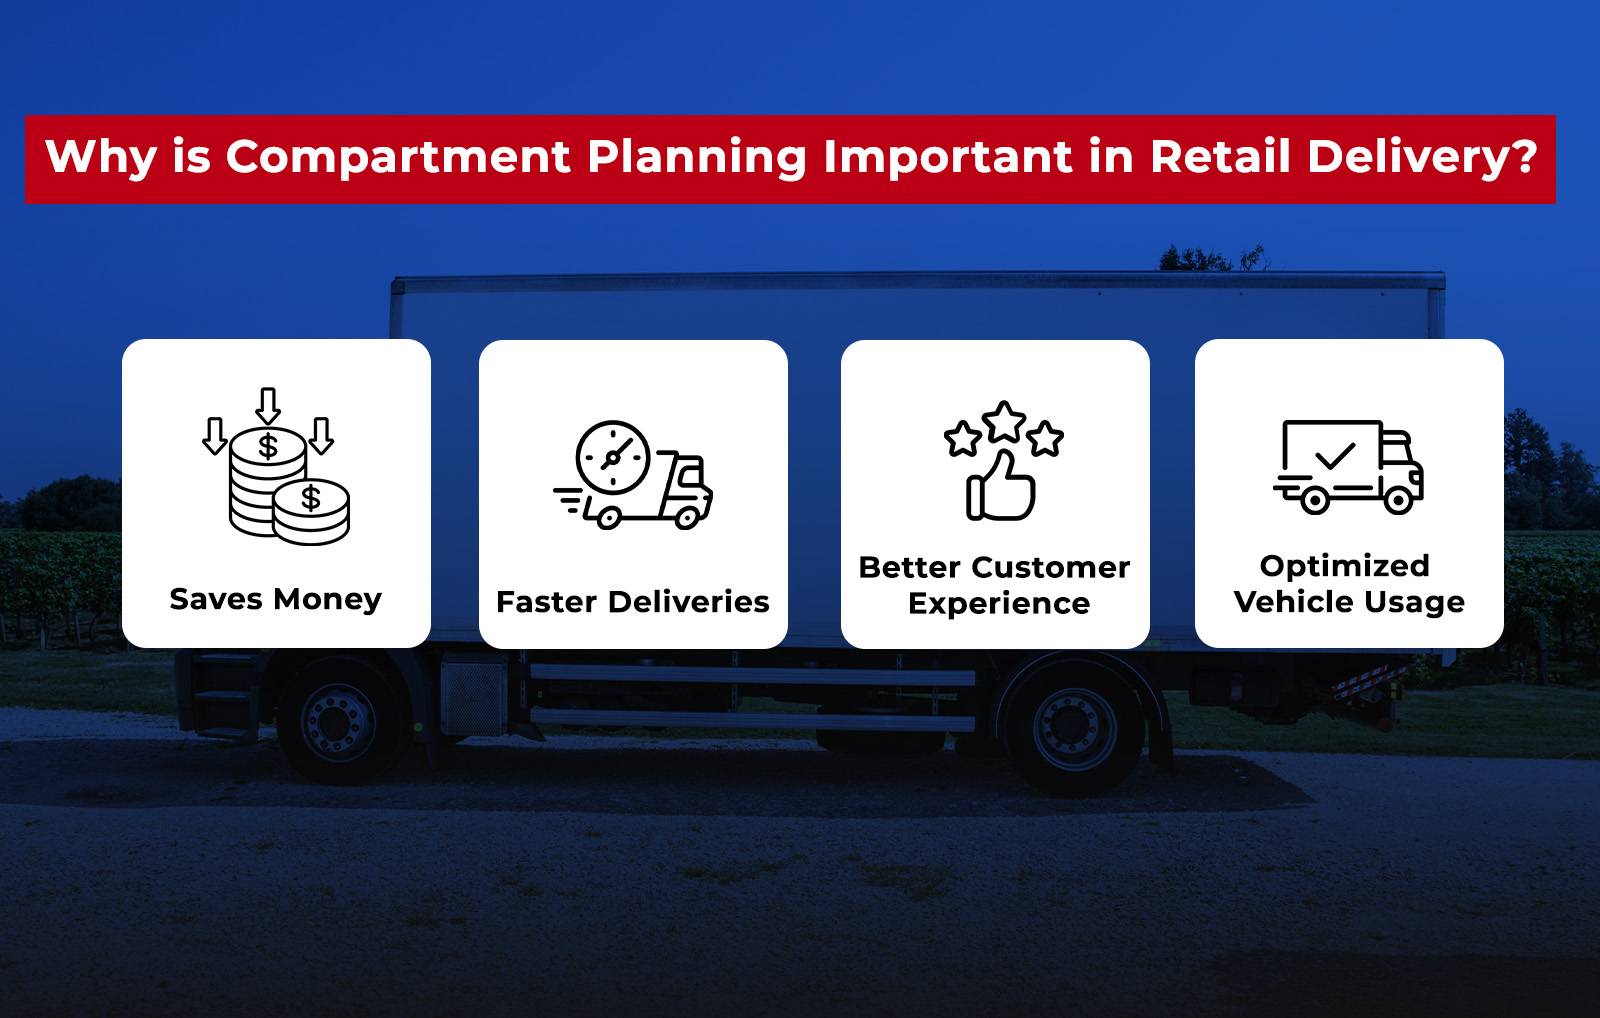 Learn the Importance of compartment planning in retail delivery